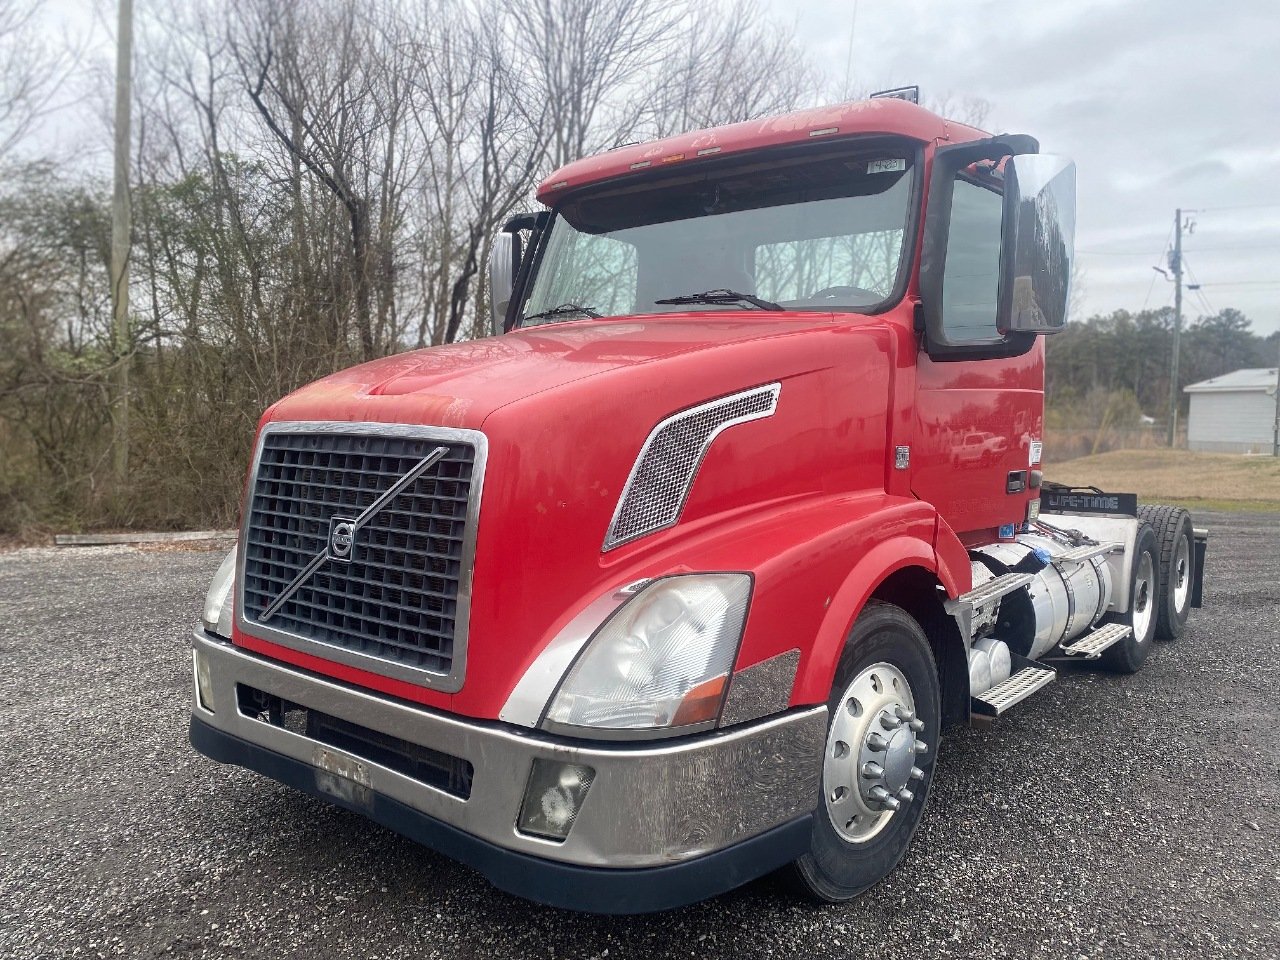 USED 2014 VOLVO VNL64T300 TANDEM AXLE DAYCAB TRUCK #15206